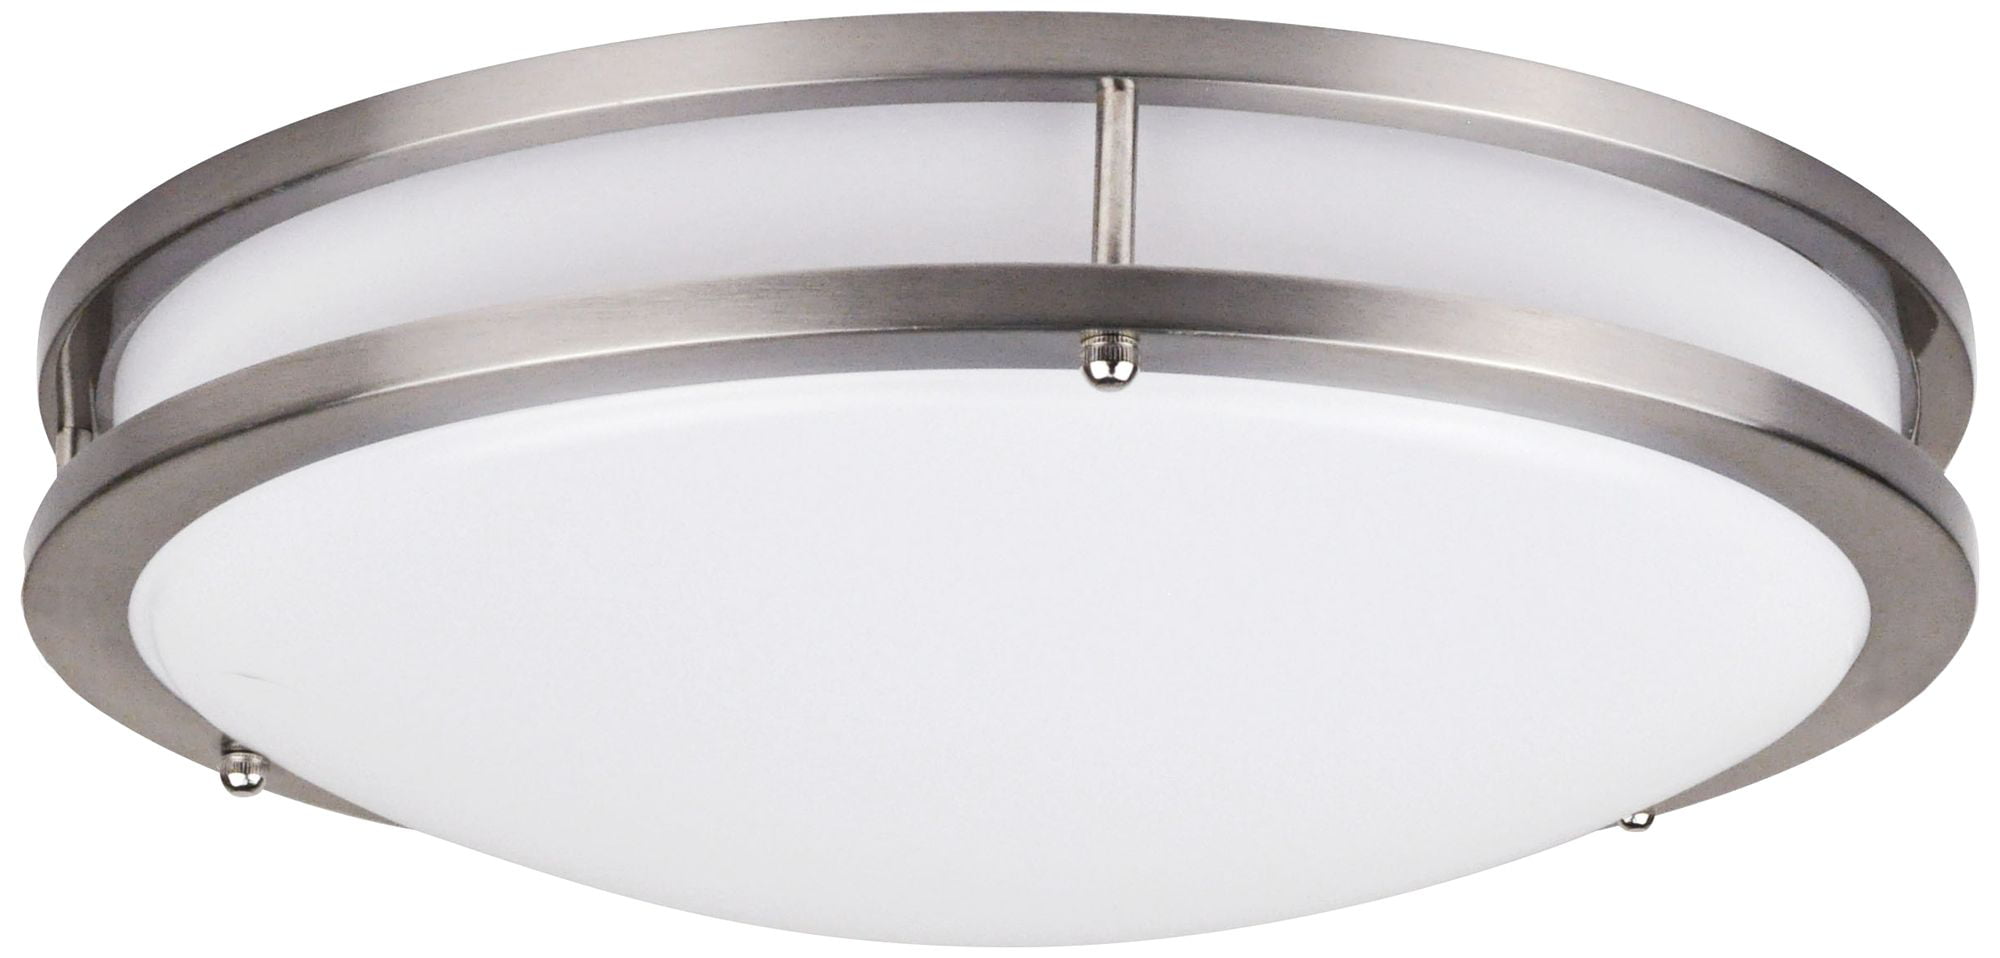 RV 12 Volt Nickel LED Overhead Recessed Light Frosted Lens Push Spring Fit 3500K